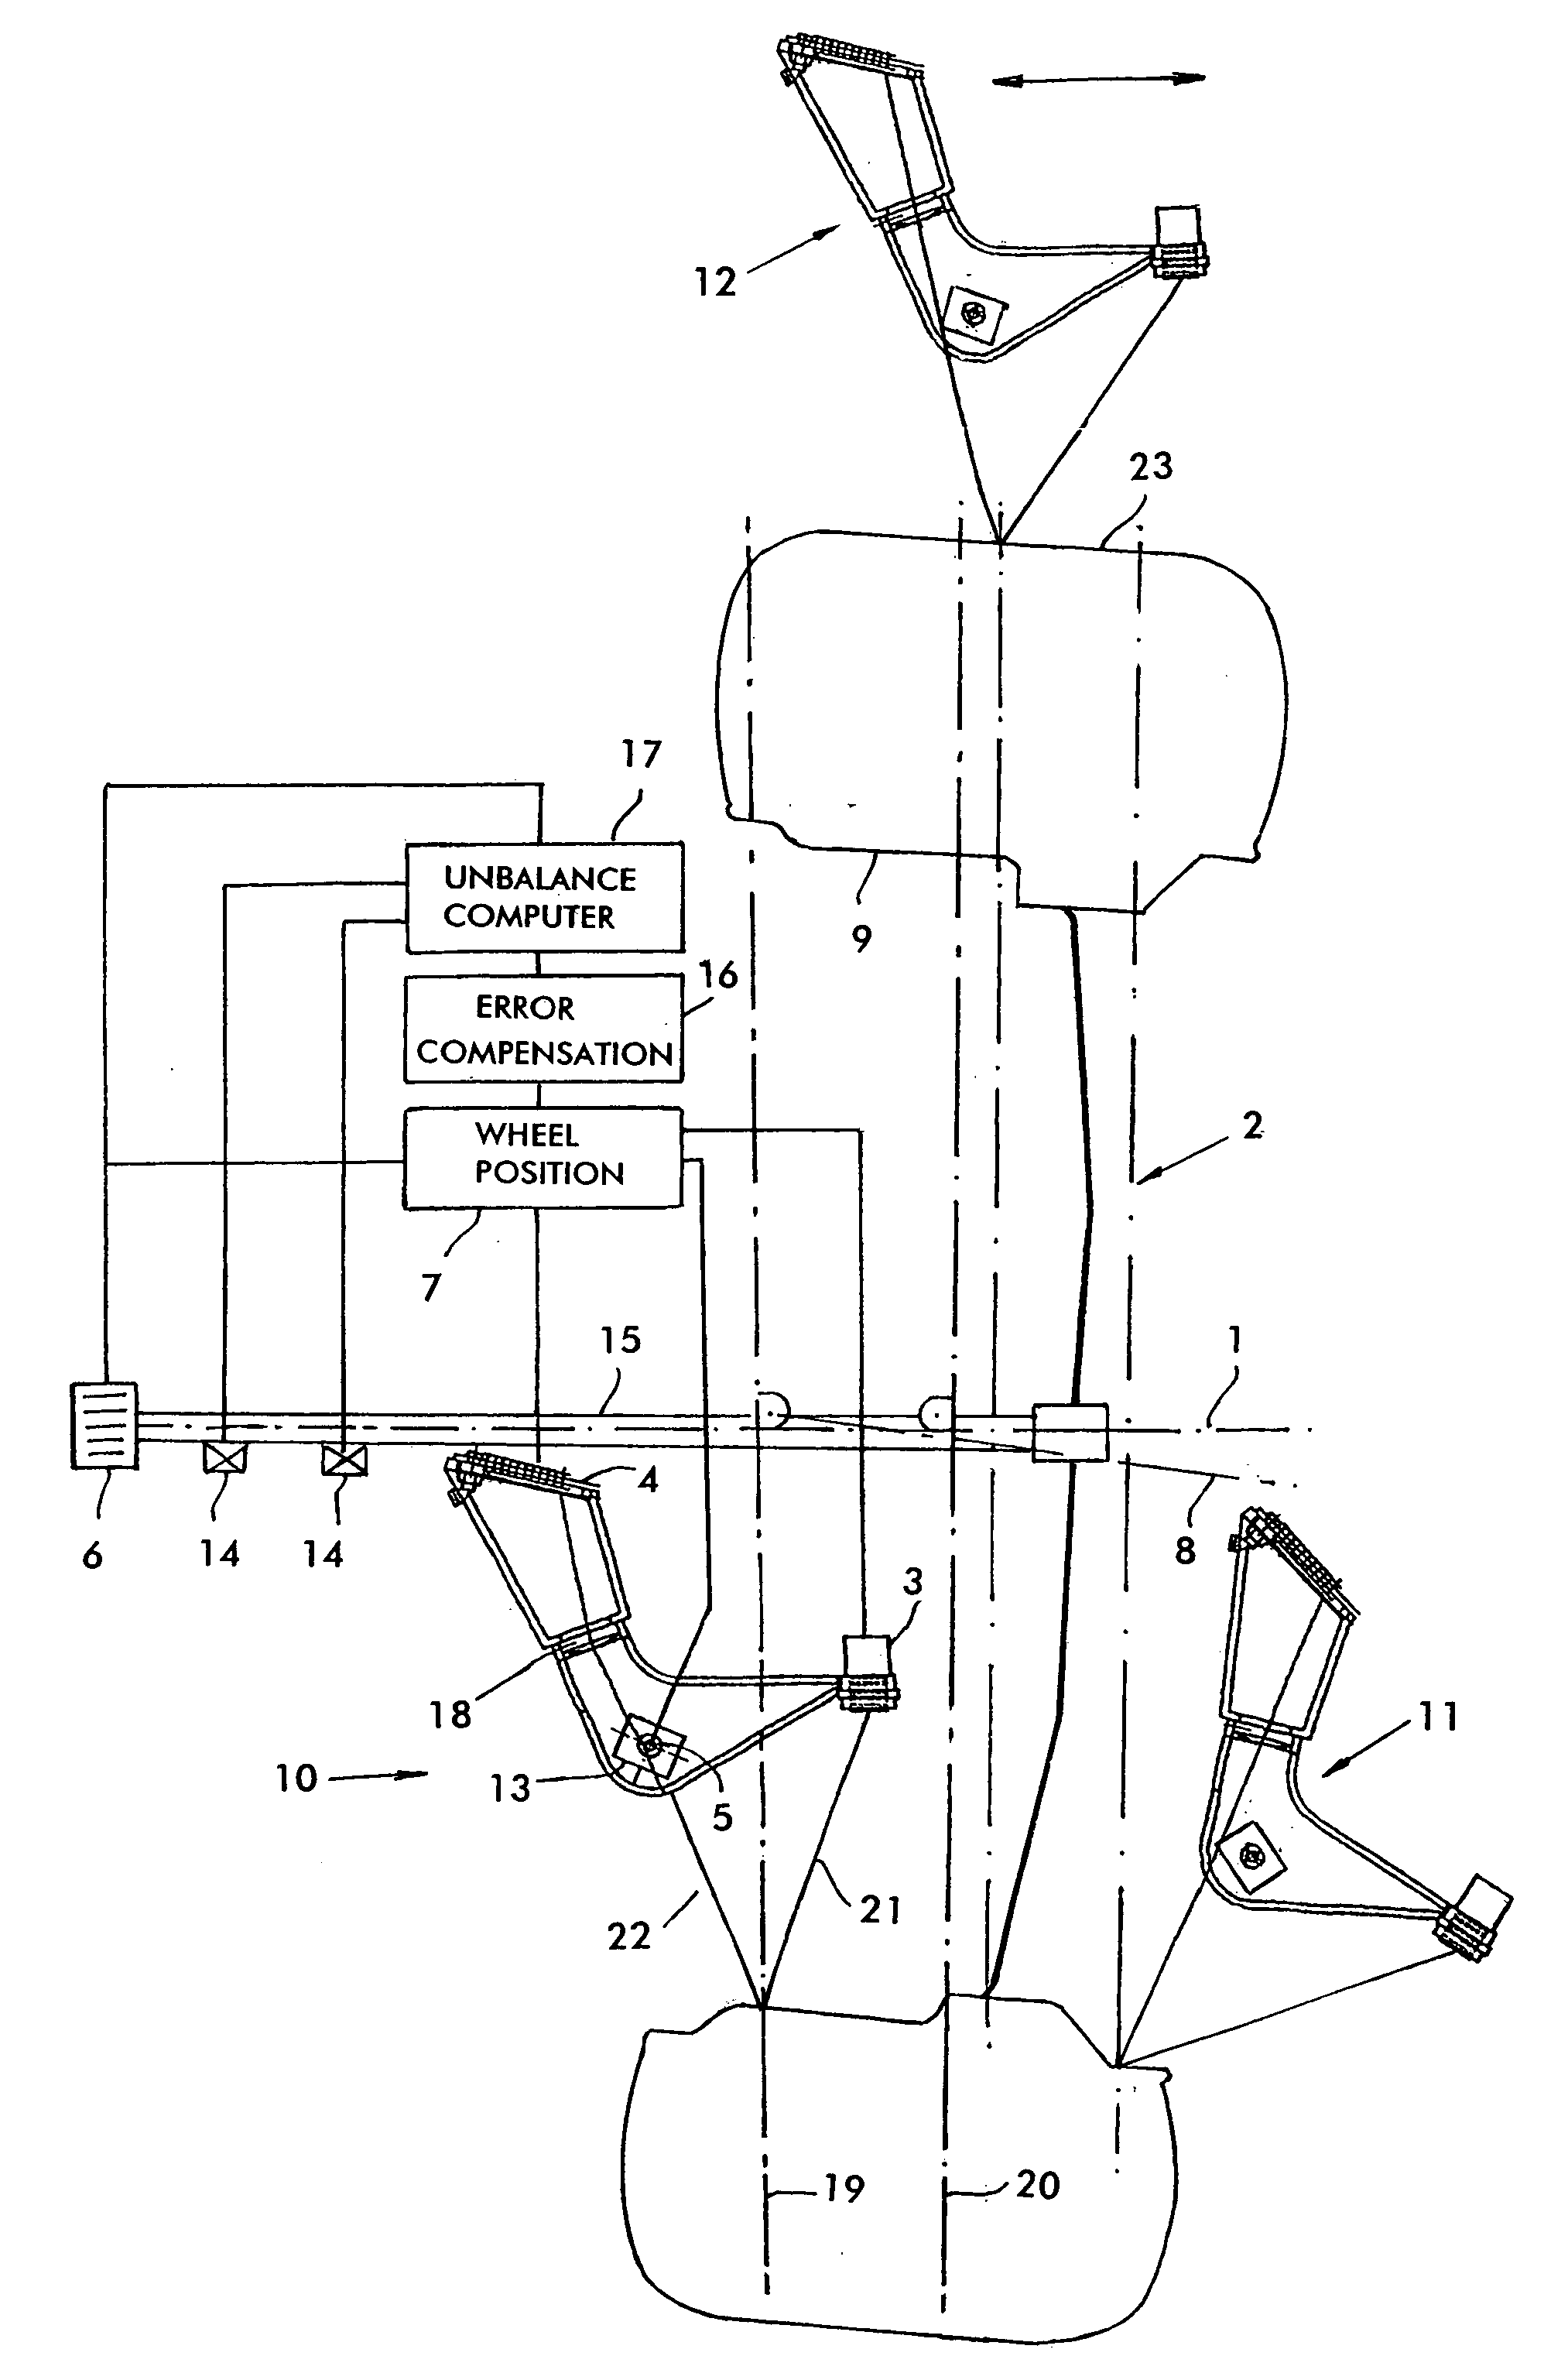 Method and apparatus for determining geometrical data of a motor vehicle wheel mounted rotatably about an axis of rotation